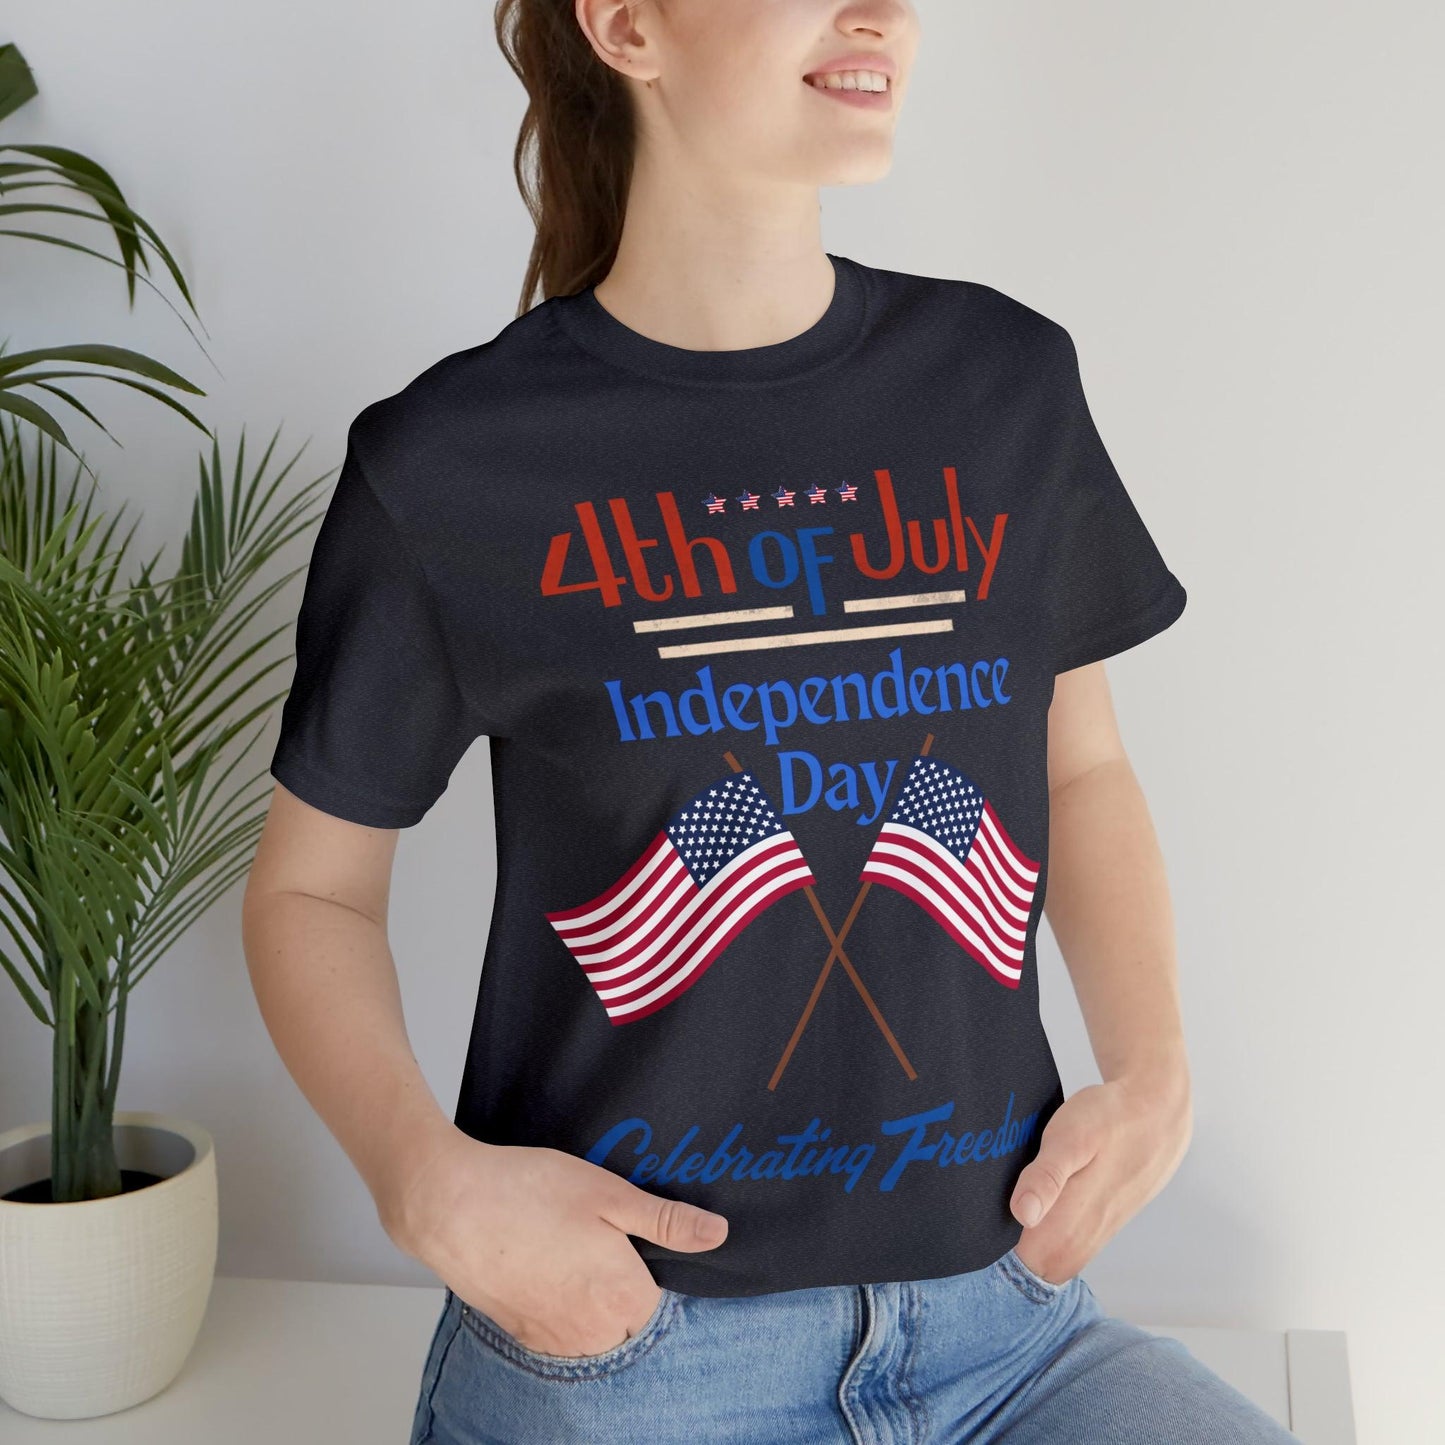 Express Your Patriotism with 4th of July Flag Shirt: Independence Day, Fireworks, Celebrating Freedom - Perfect for Women and Men - Giftsmojo